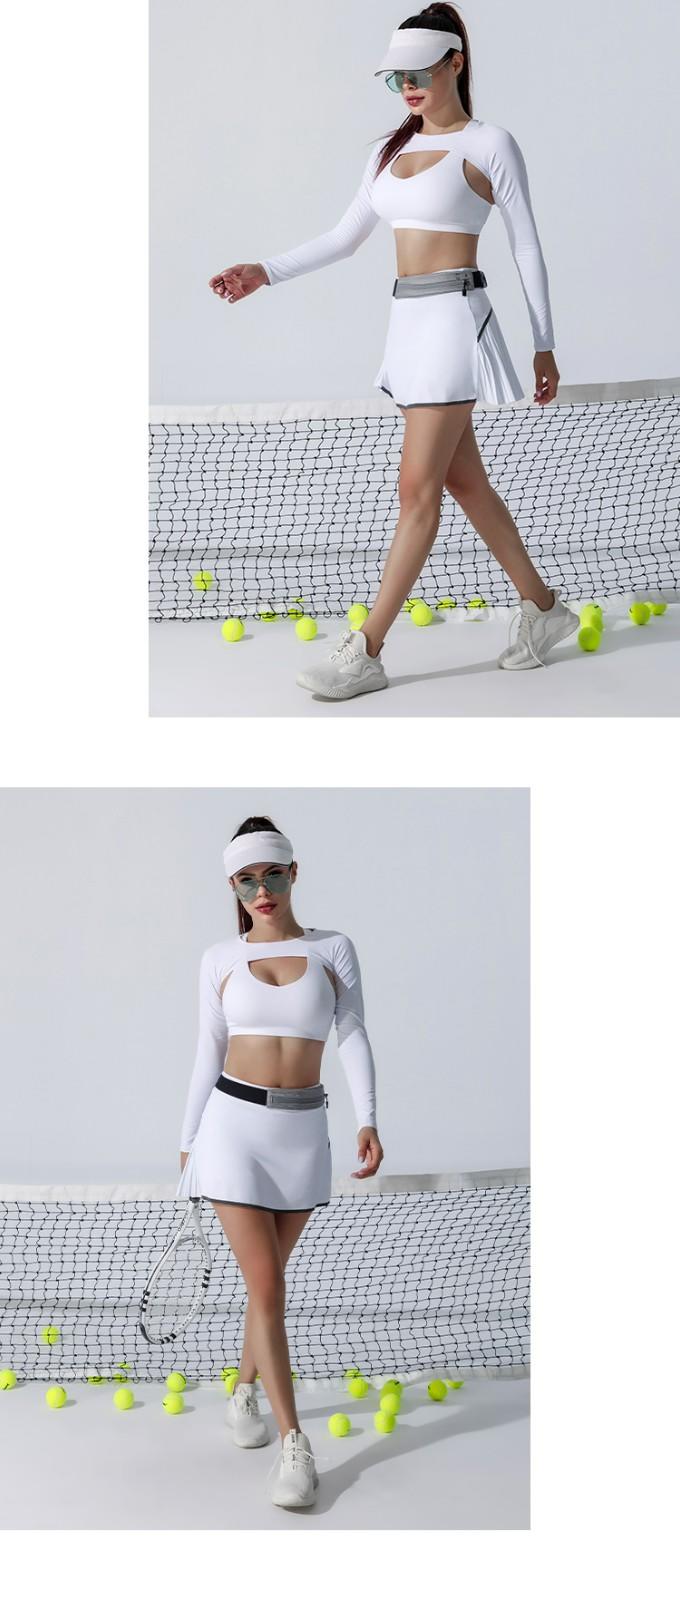 personalized tennis wear ladies supplier for sport